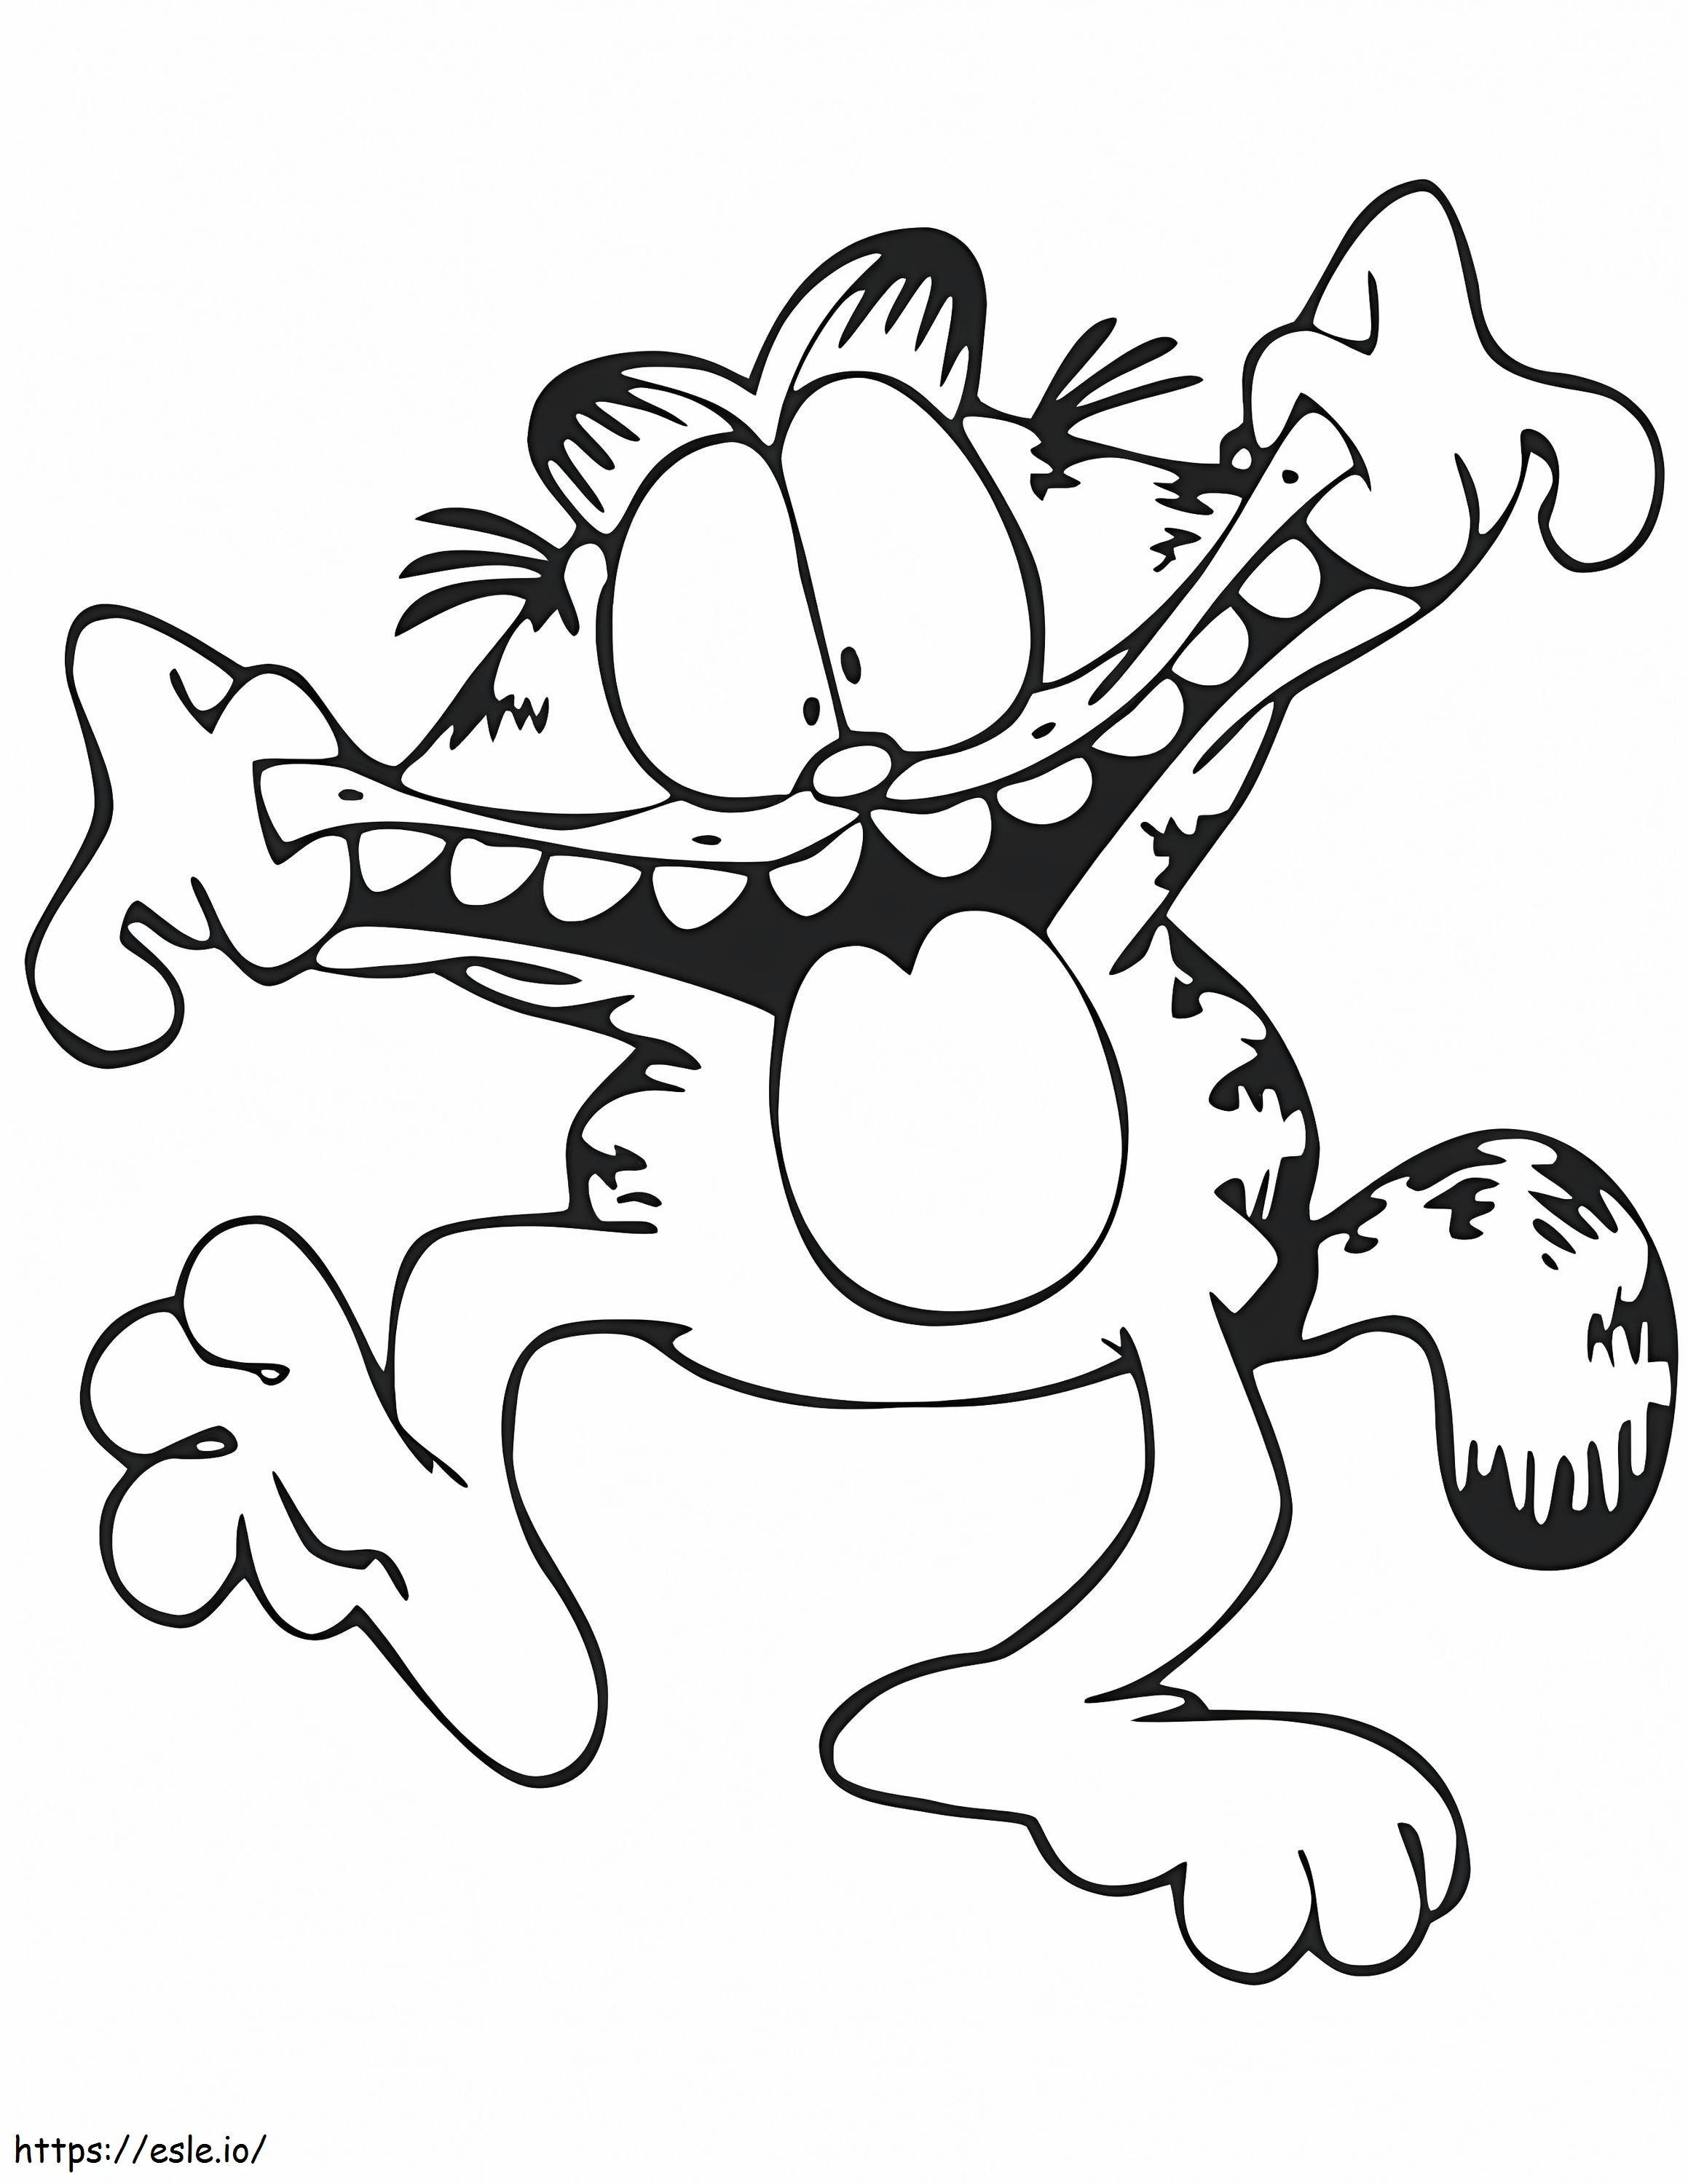 Funny Garfield coloring page